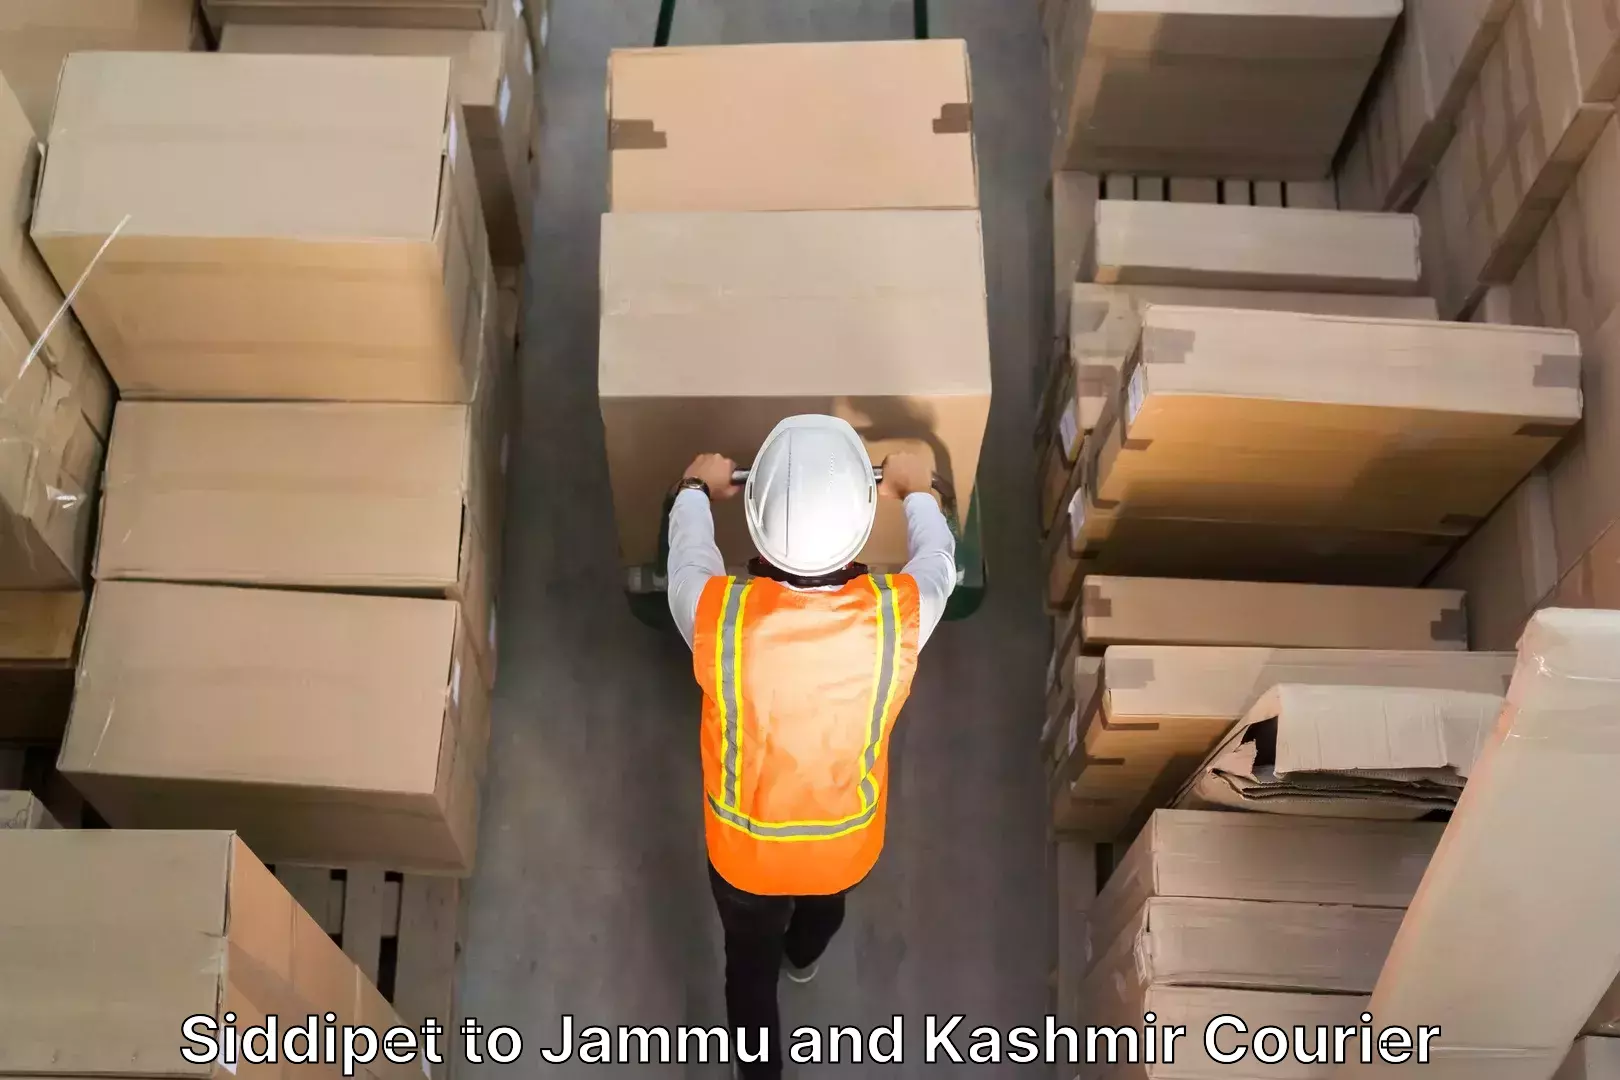 Specialized moving company Siddipet to Jammu and Kashmir